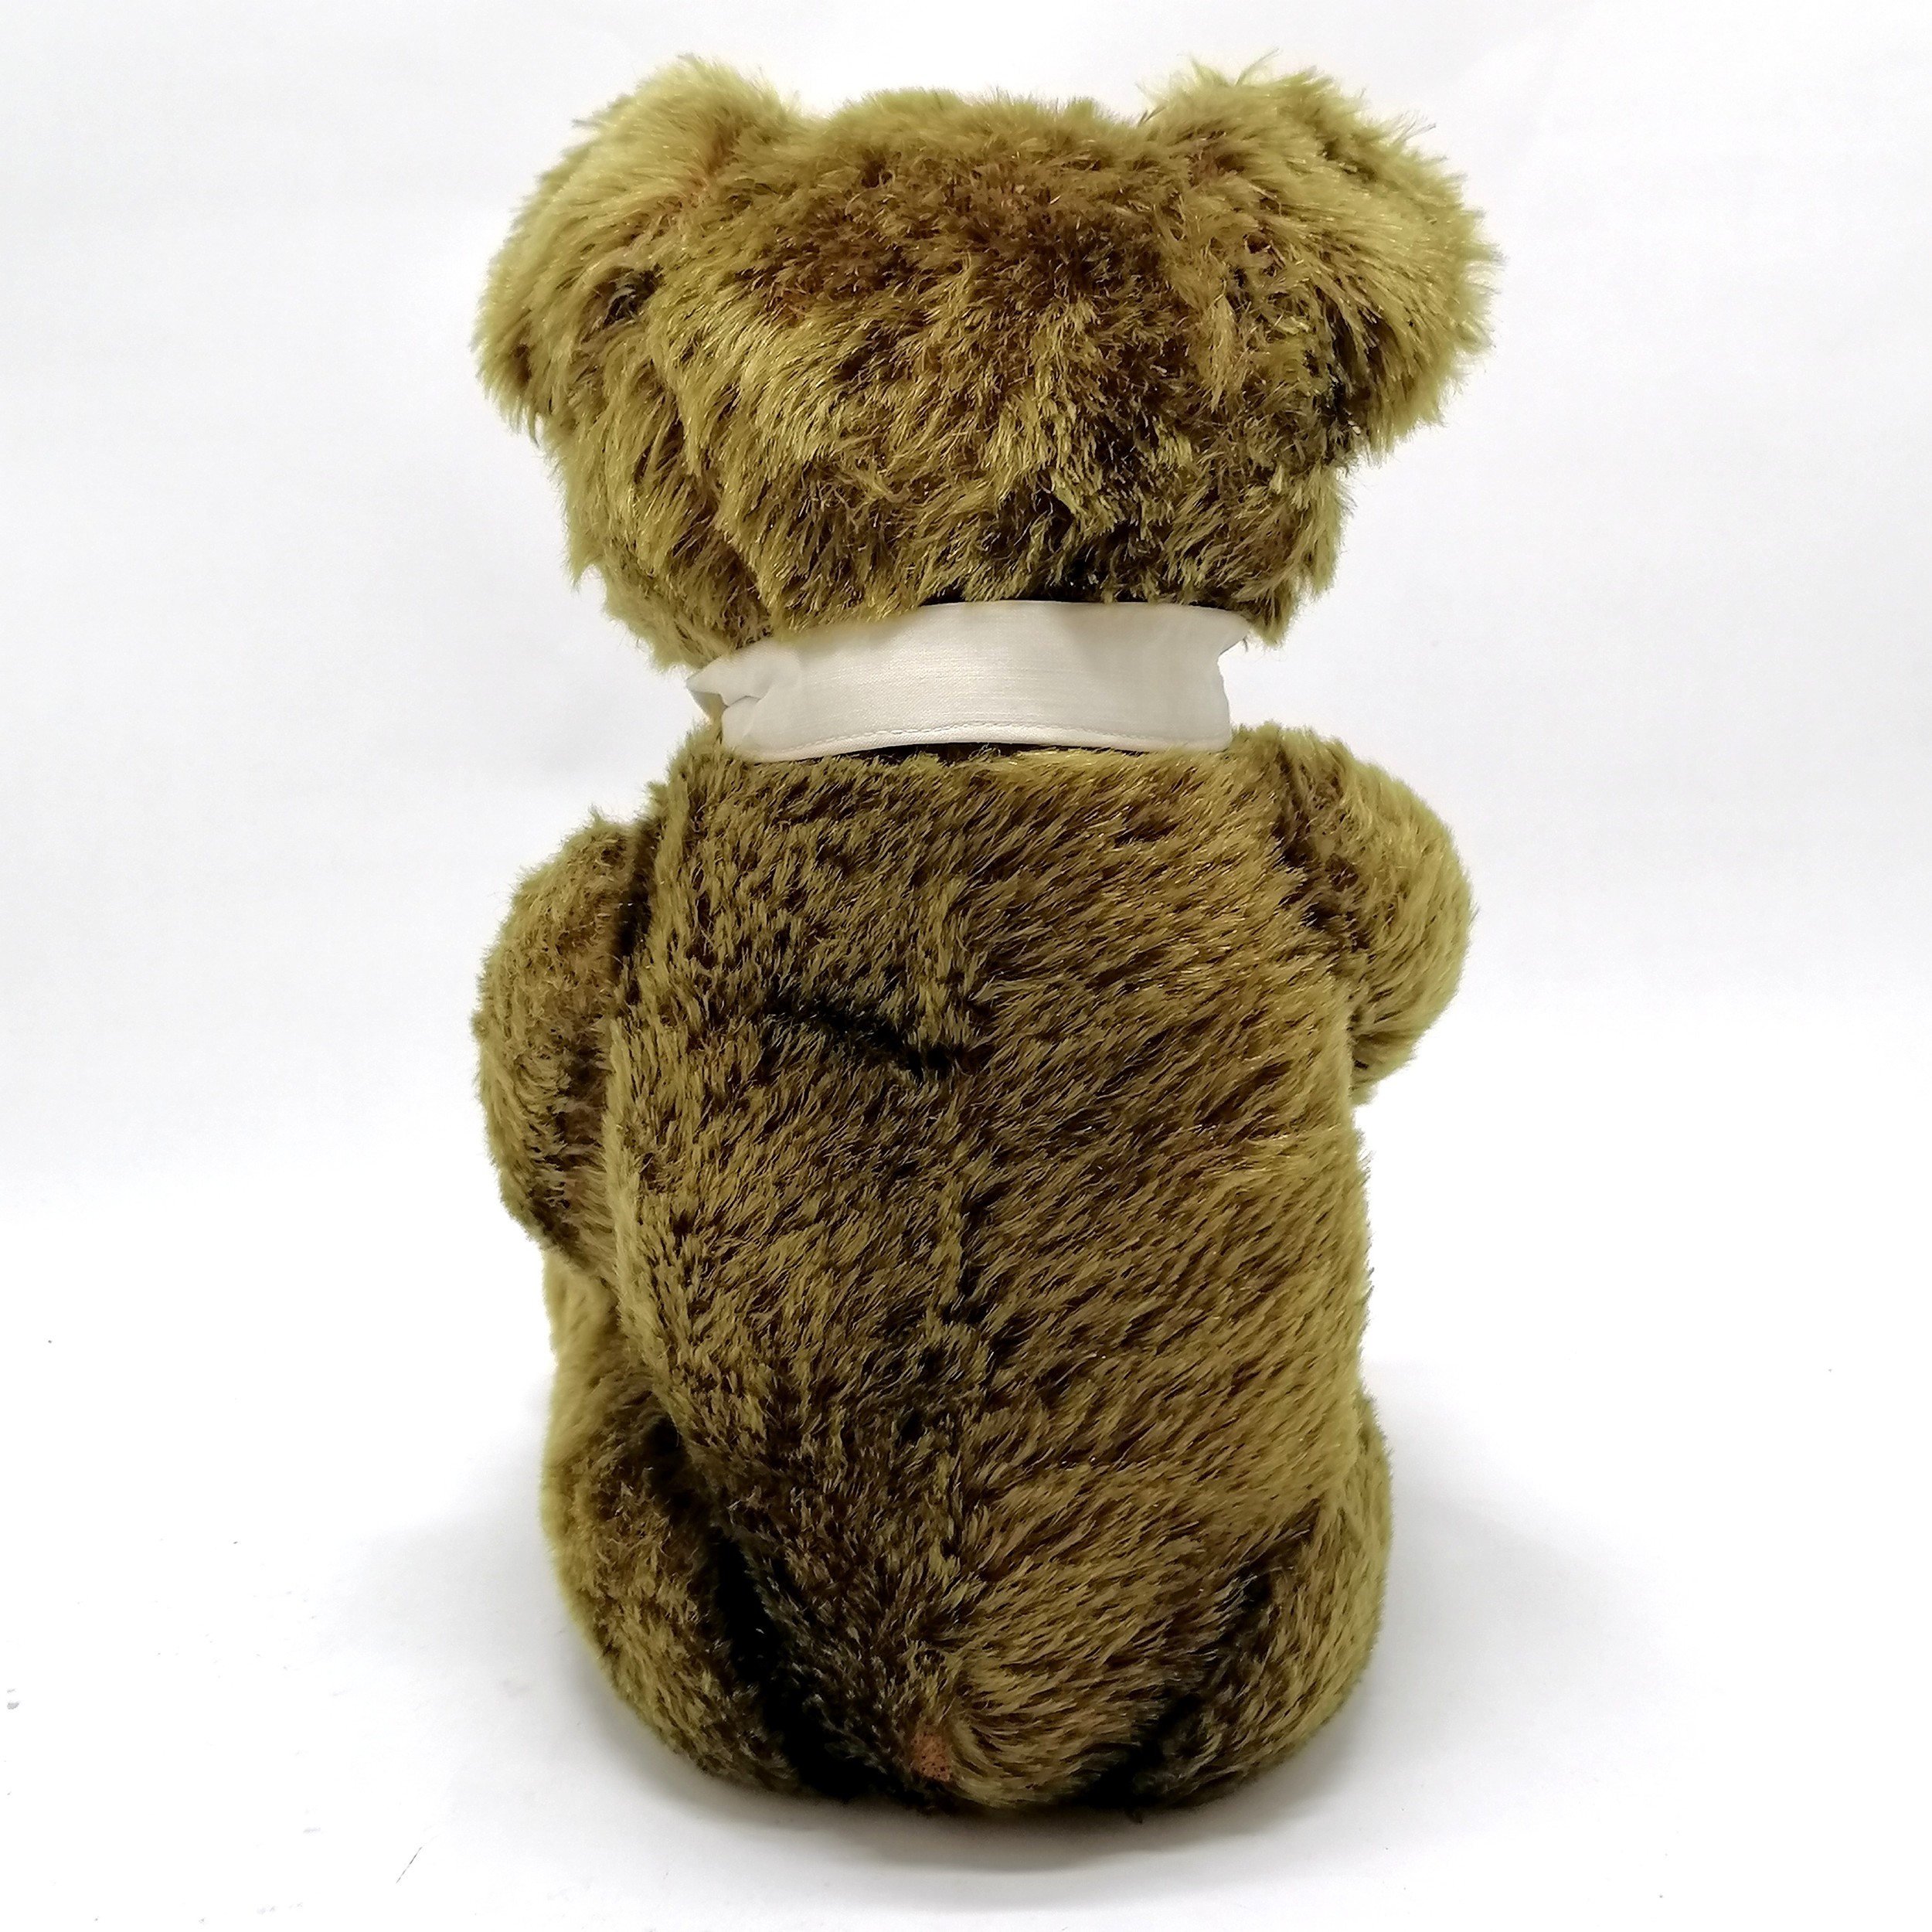 Vintage green mohair jointed Teddy bear 'Knickerbocker' c1940 with glass eyes and stitched nose - Image 2 of 9